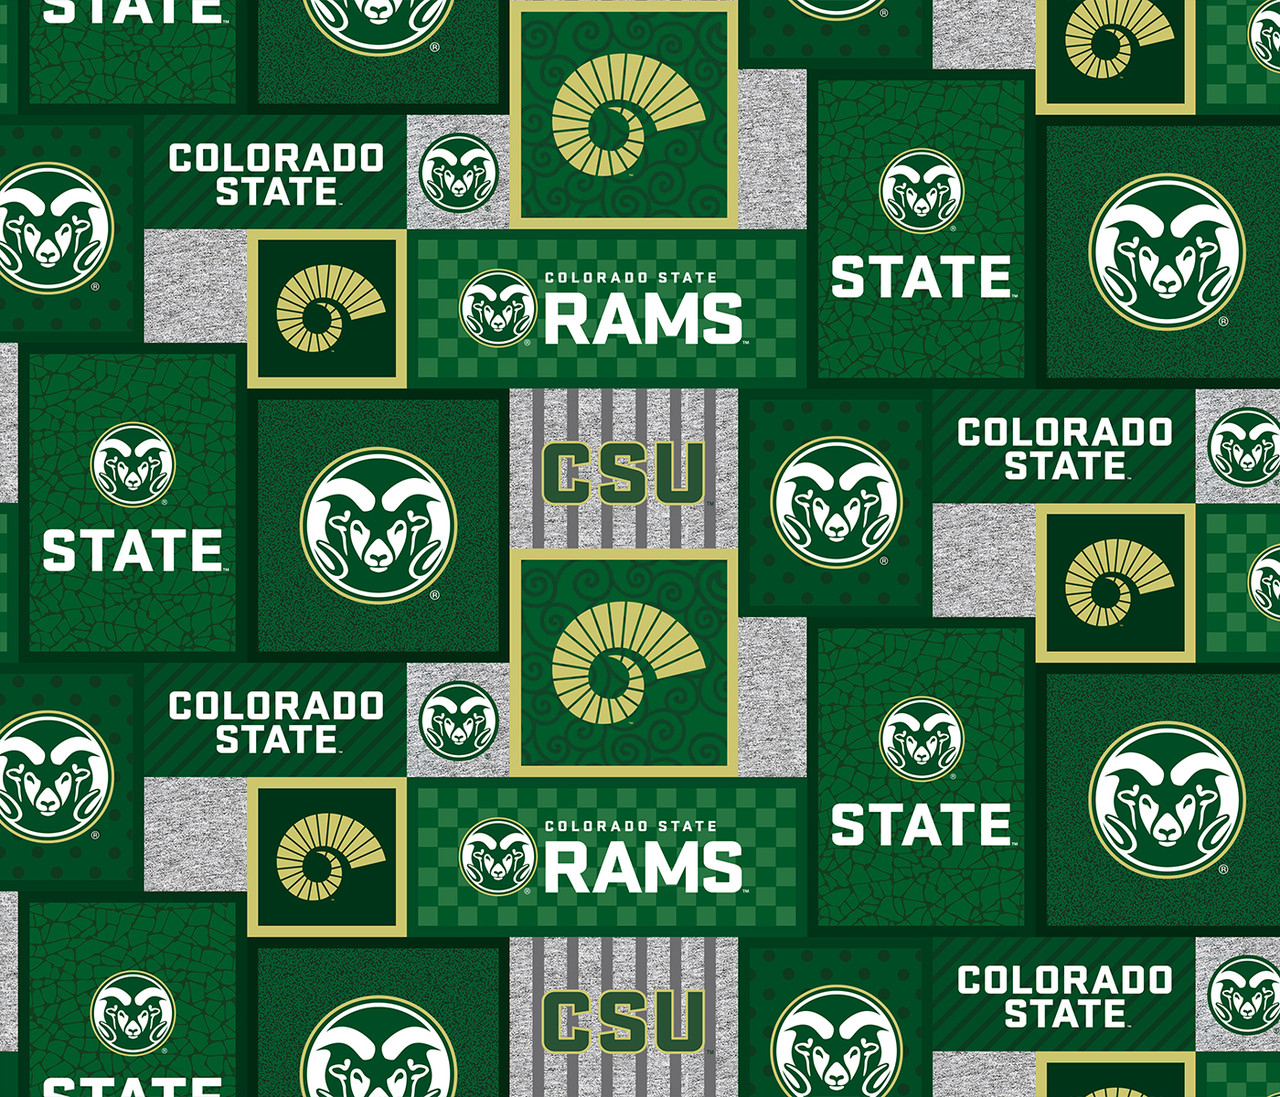 Colorado State University Fleece Fabric with College Patch Design - Sold by the yard